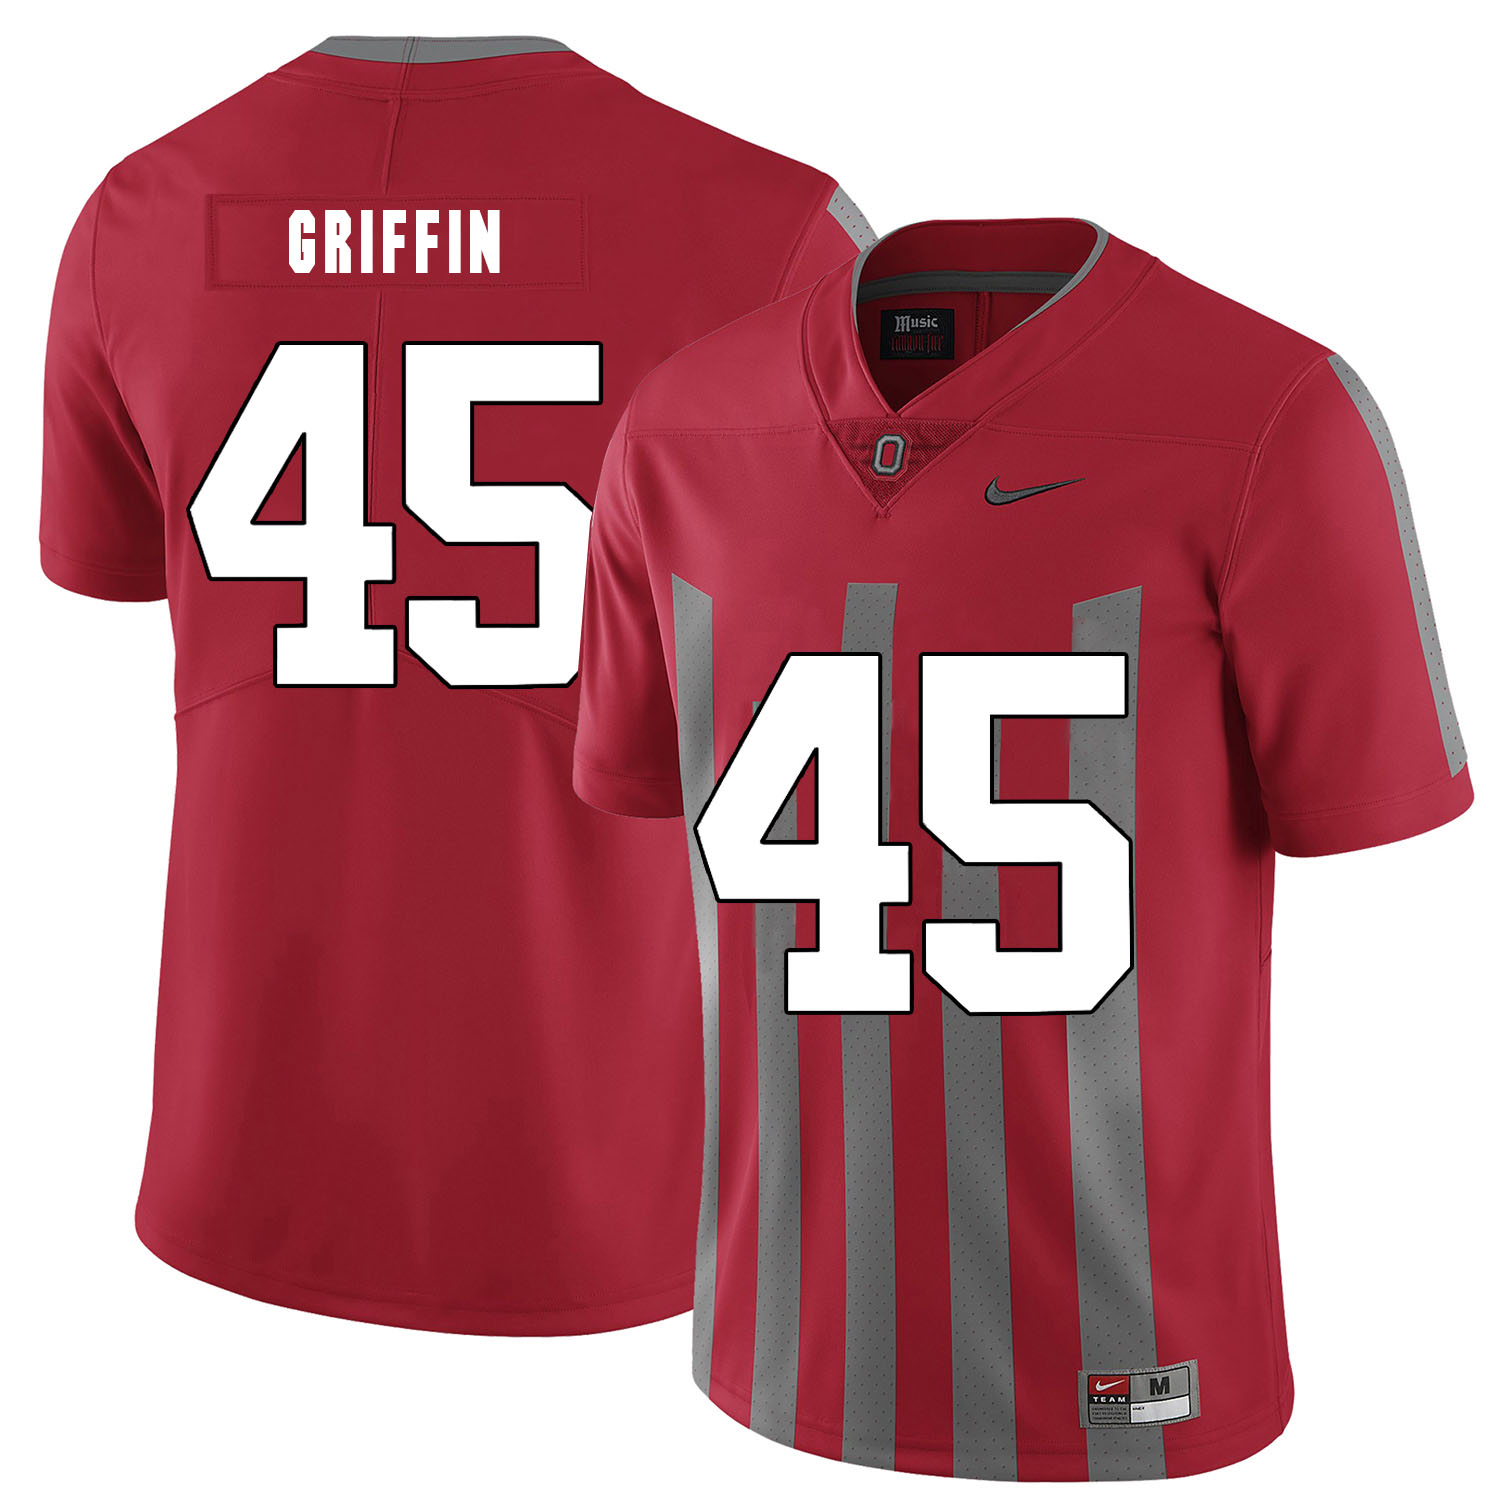 Ohio State Buckeyes 45 Archie Griffin Red Elite Nike College Football Jersey